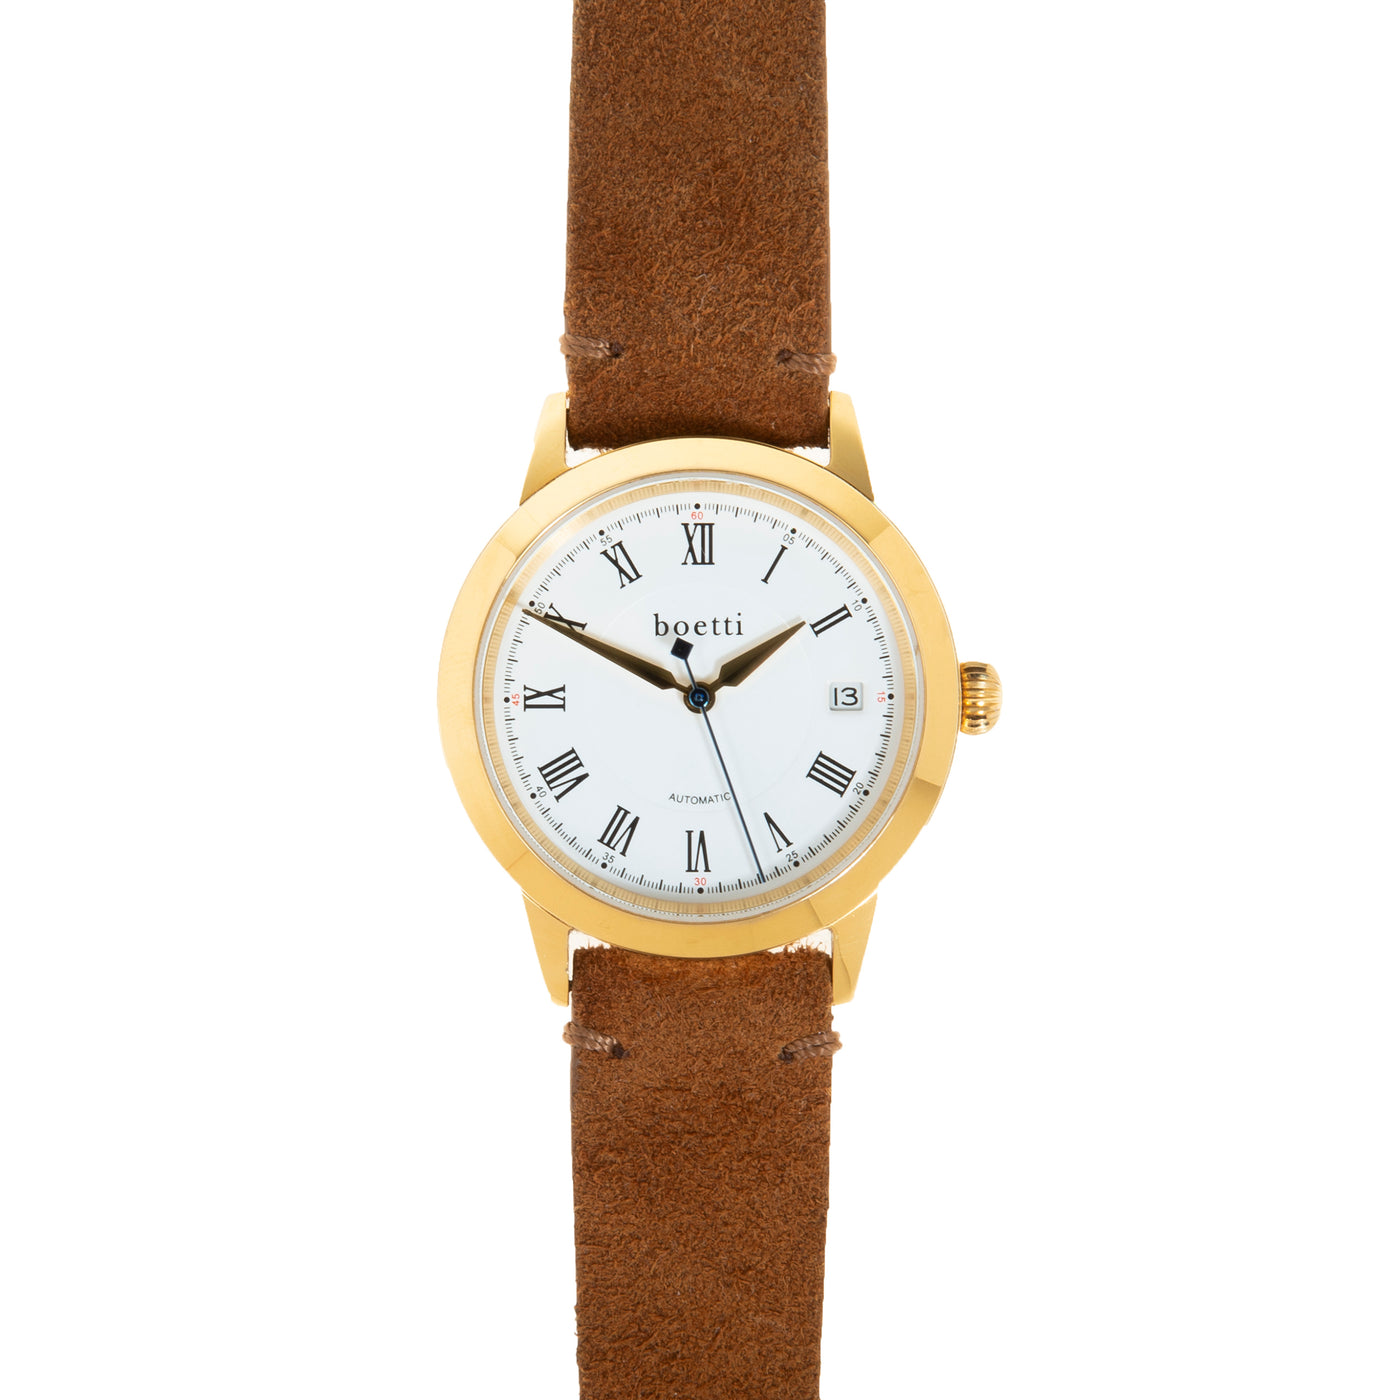 36 Automatic – Gold w/ Tan Suede Strap - Boetti - Are You Man Enough to Wear a Small Watch?